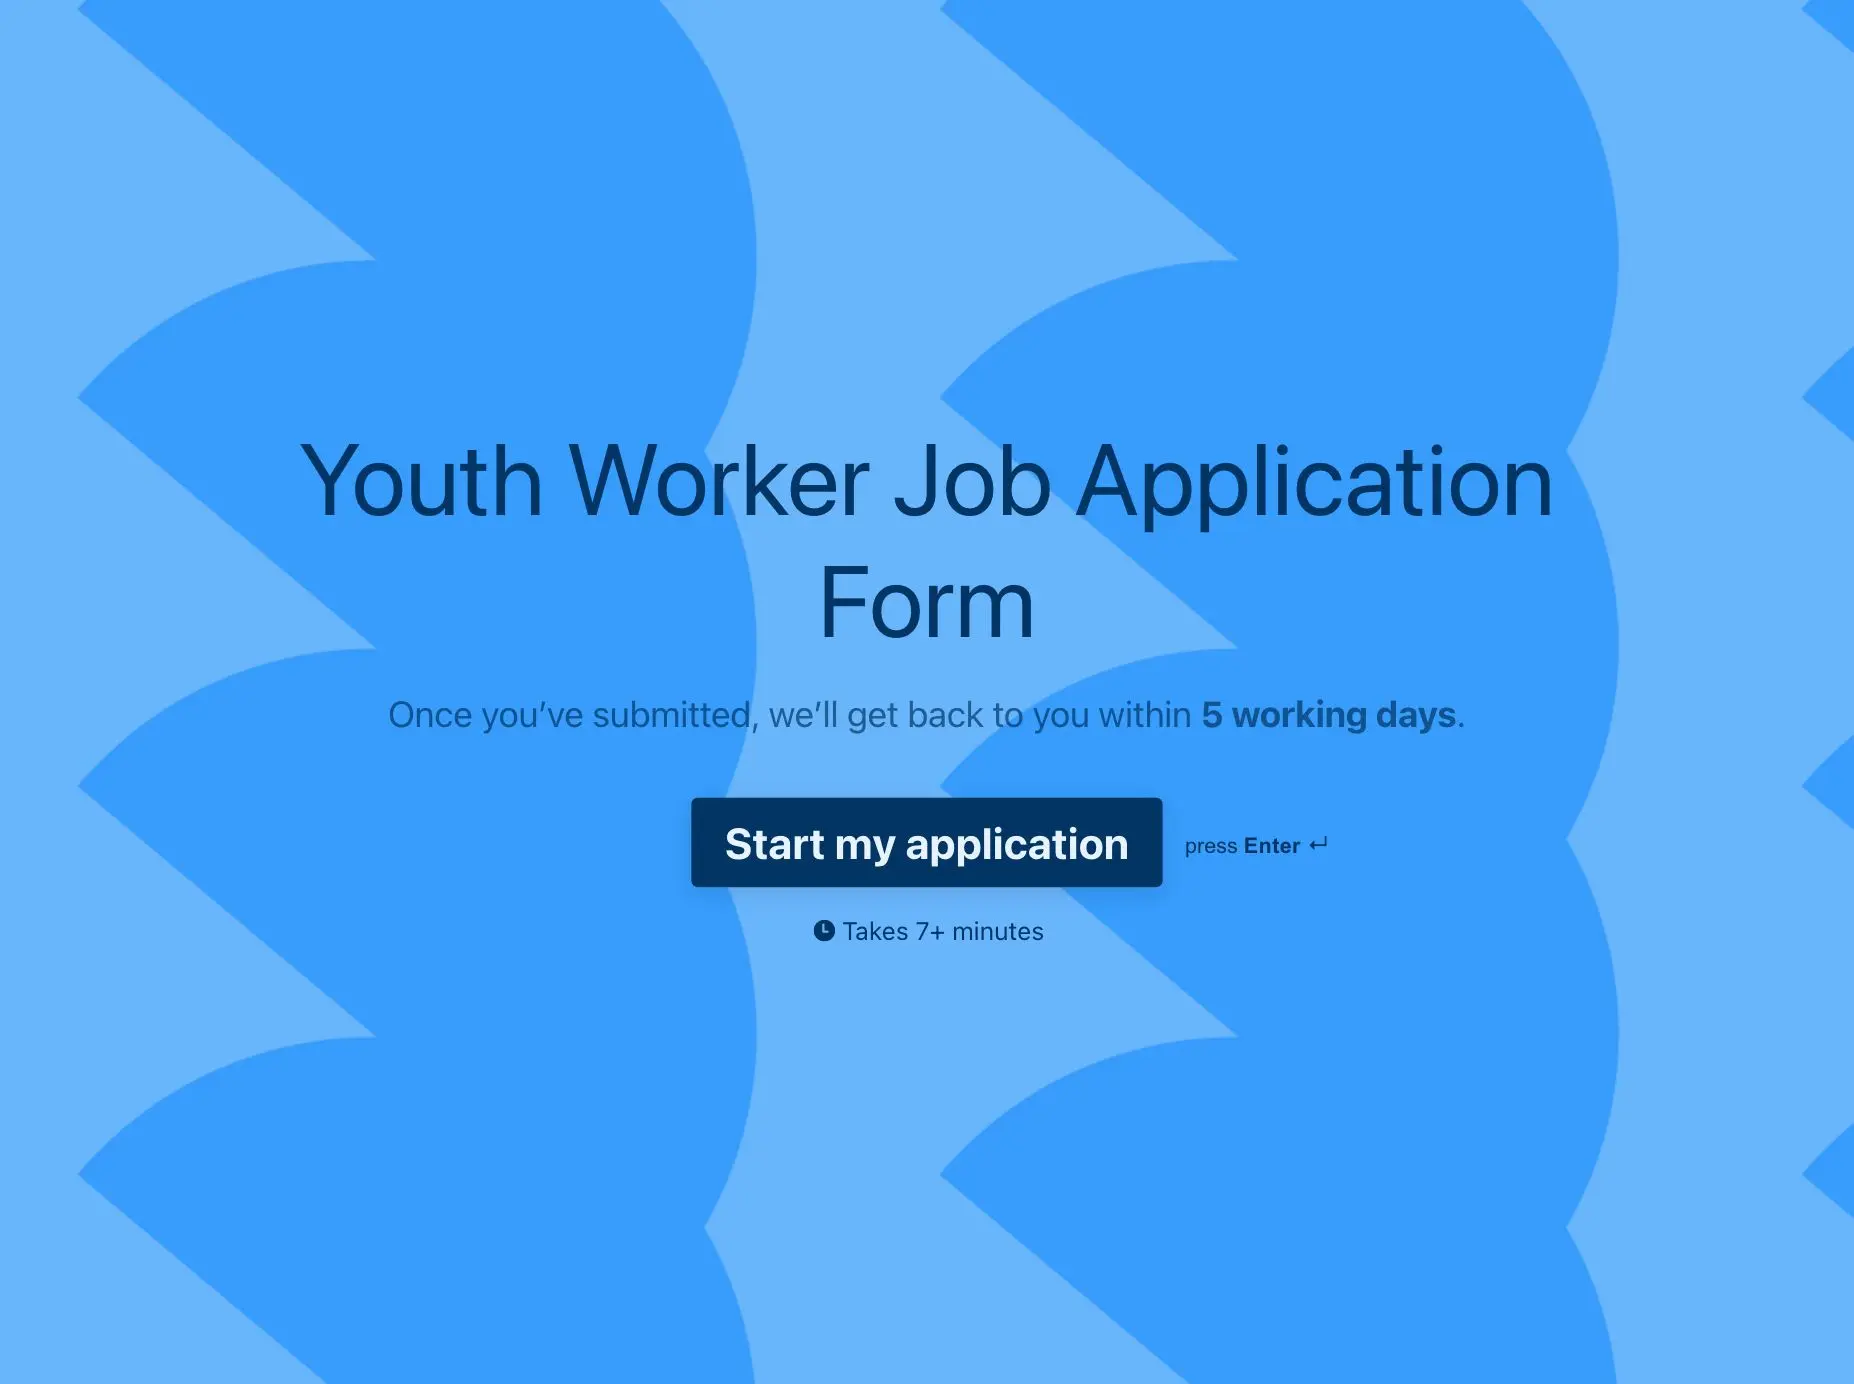 Youth Worker Job Application Form Template Hero